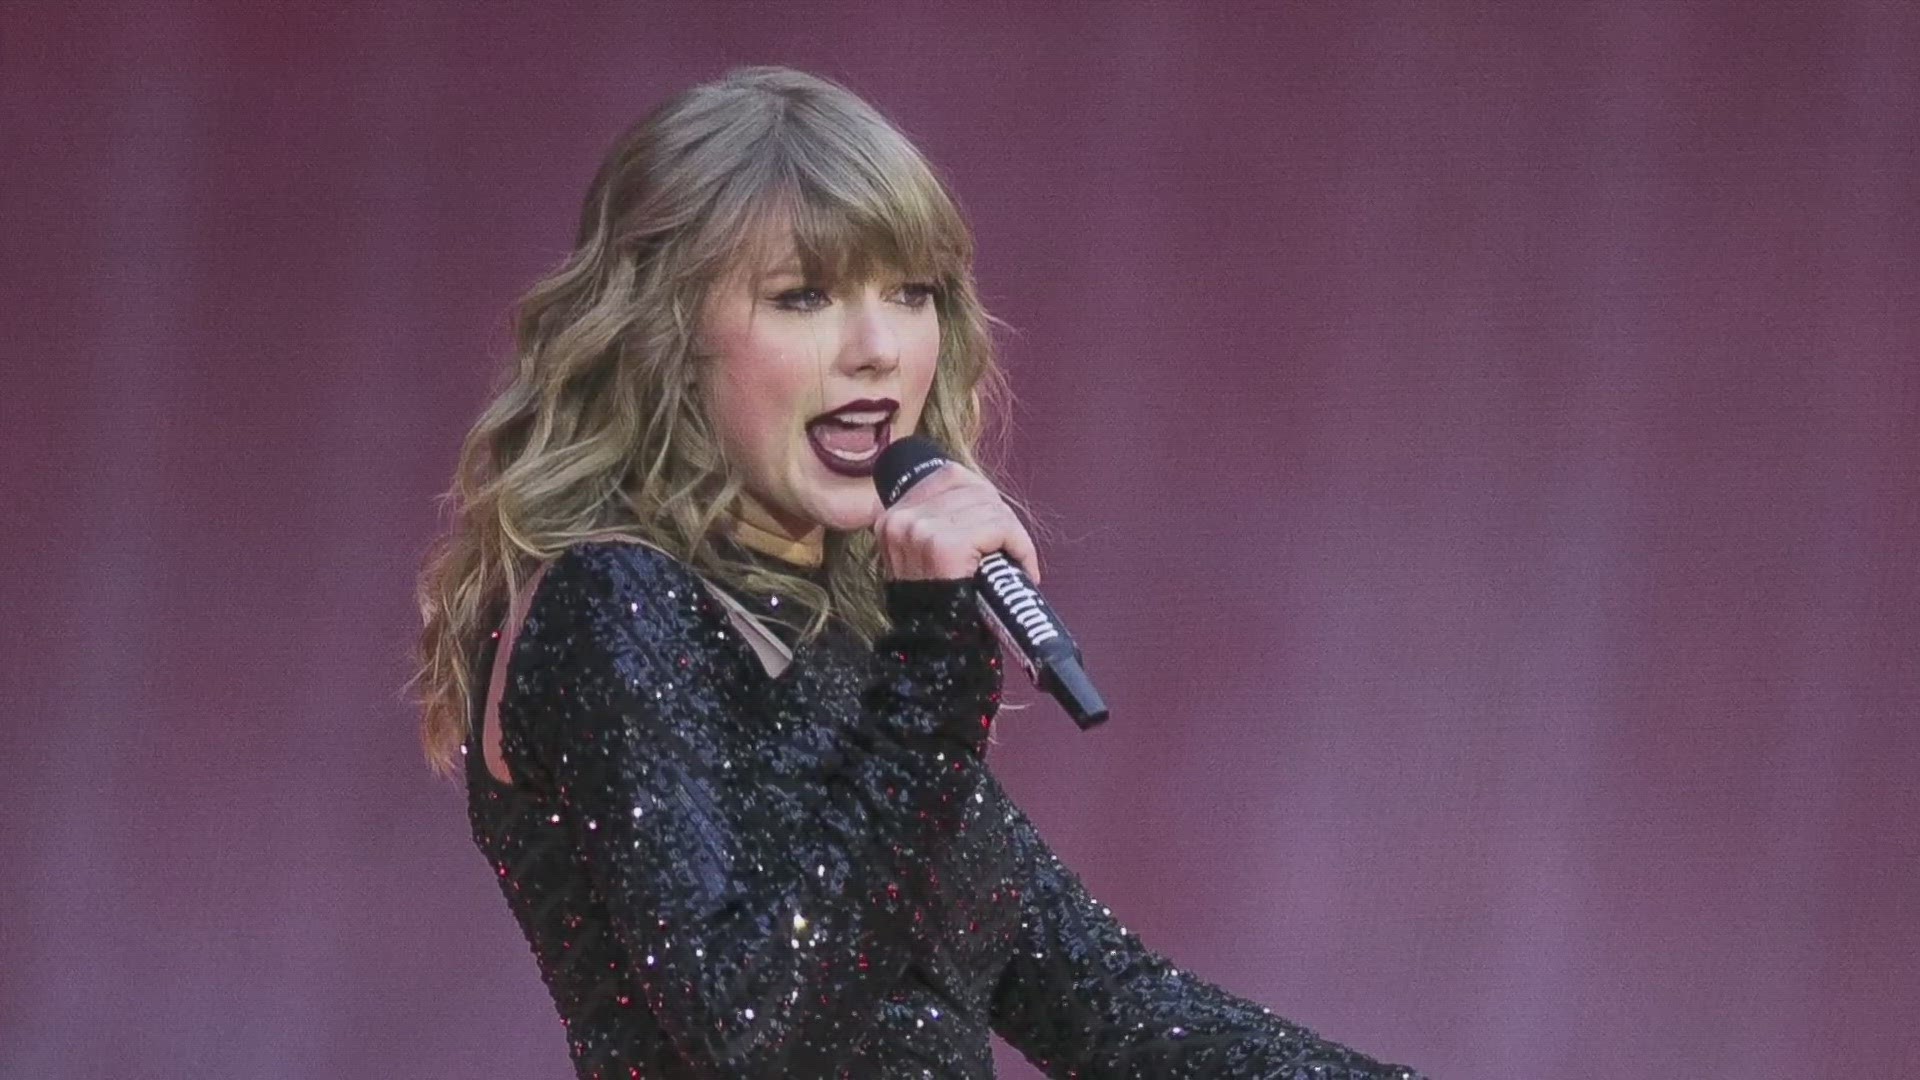 The city of Glendale, a.k.a. "Swift City," is set to host the opening nights of Taylor Swift's "Eras" tour this weekend. Rachel Cole has a preview.